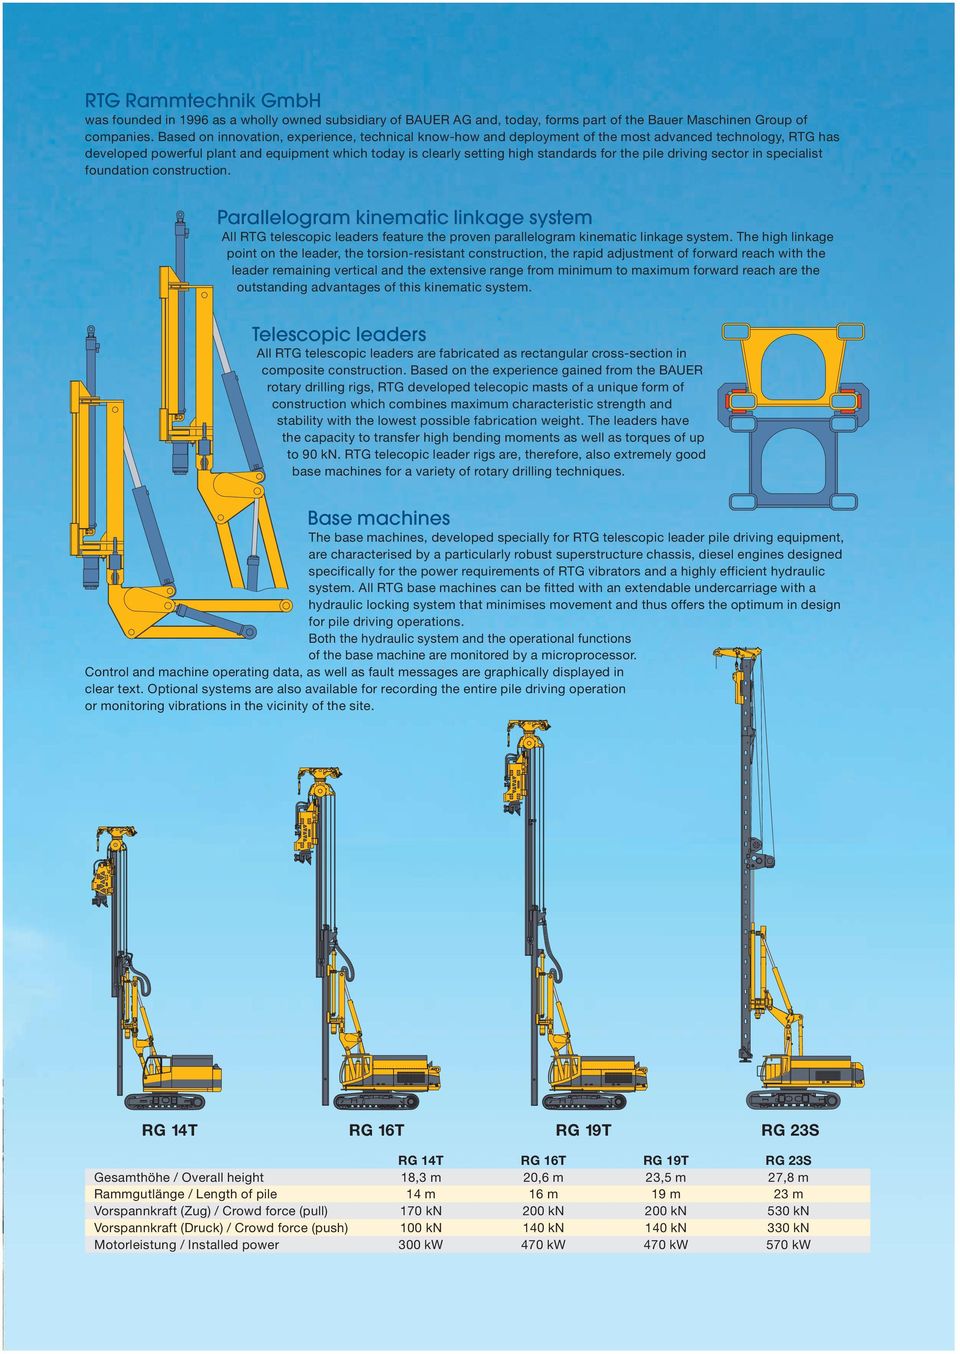 the pile driving sector in specialist foundation construction. Parallelogram kinematic linkage system All RTG telescopic leaders feature the proven parallelogram kinematic linkage system.